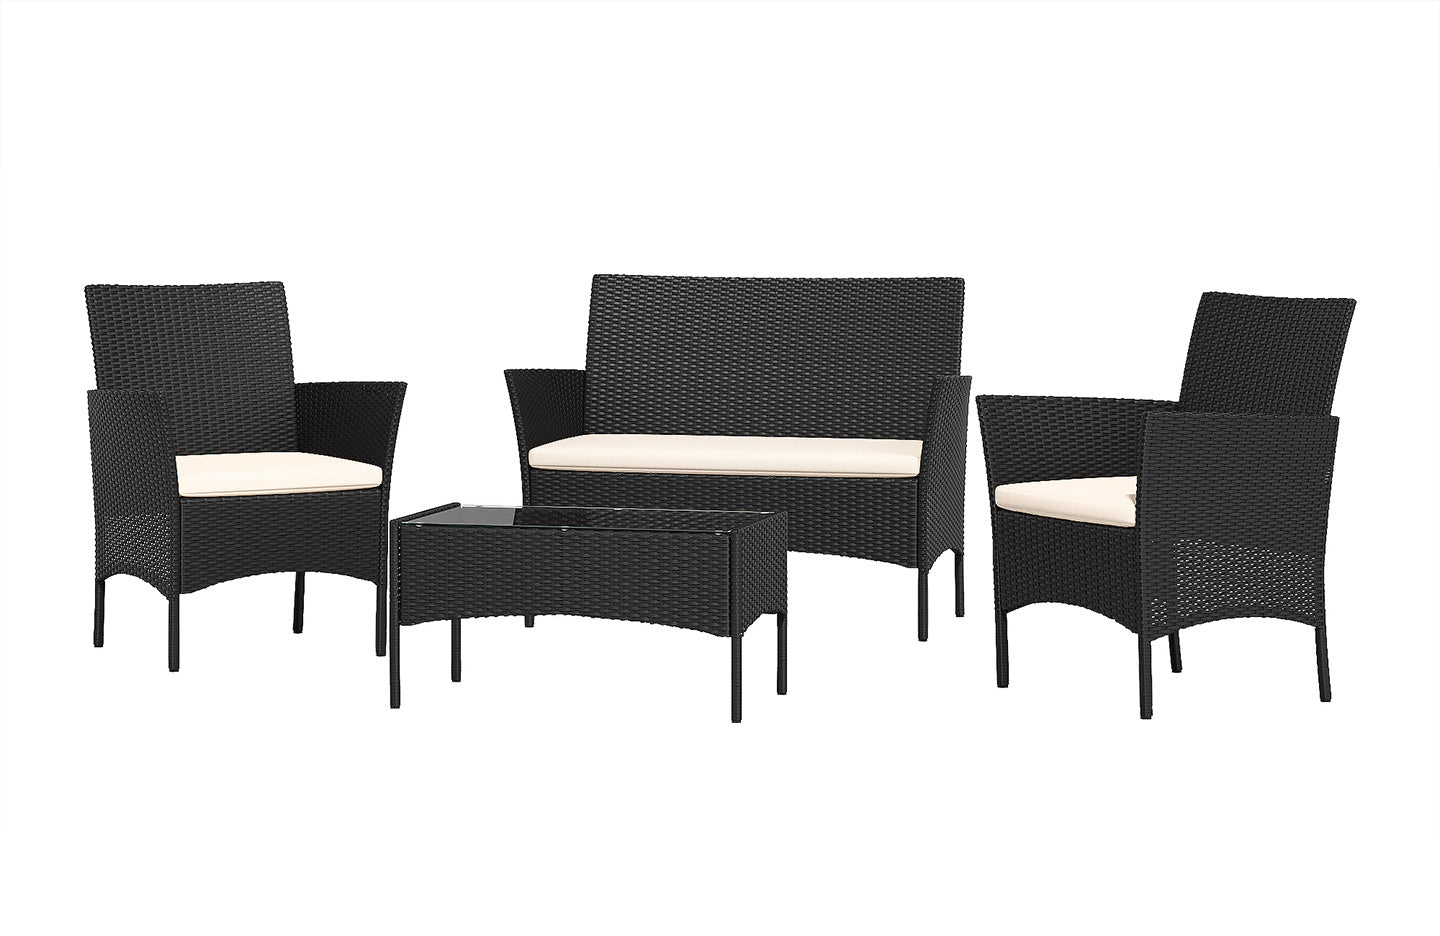 4-Seater Rattan Garden Furniture Patio Conversation Set with 2 Single Chairs, 1 Double Sofa and 1 Table